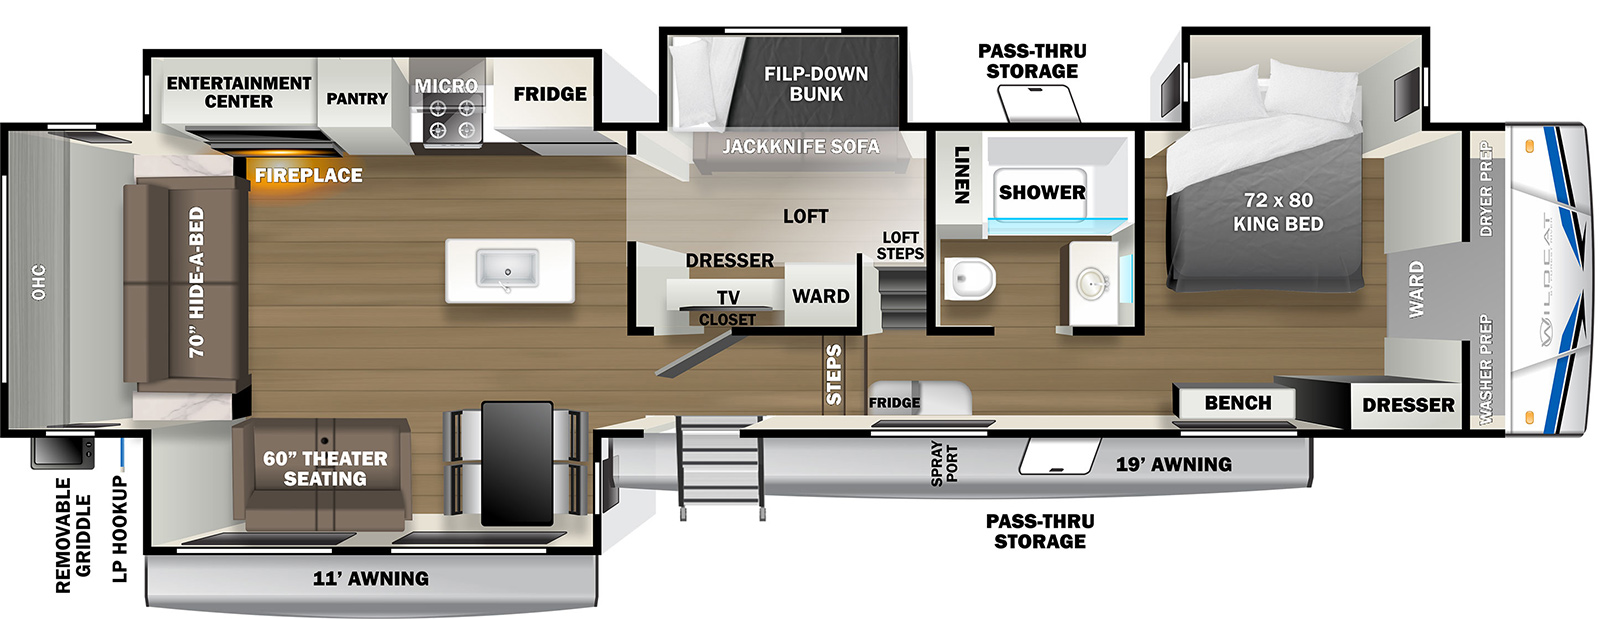 Wildcat Fifth Wheels 369MBL floorplan. The 369MBL has 4 slide outs and one entry door.